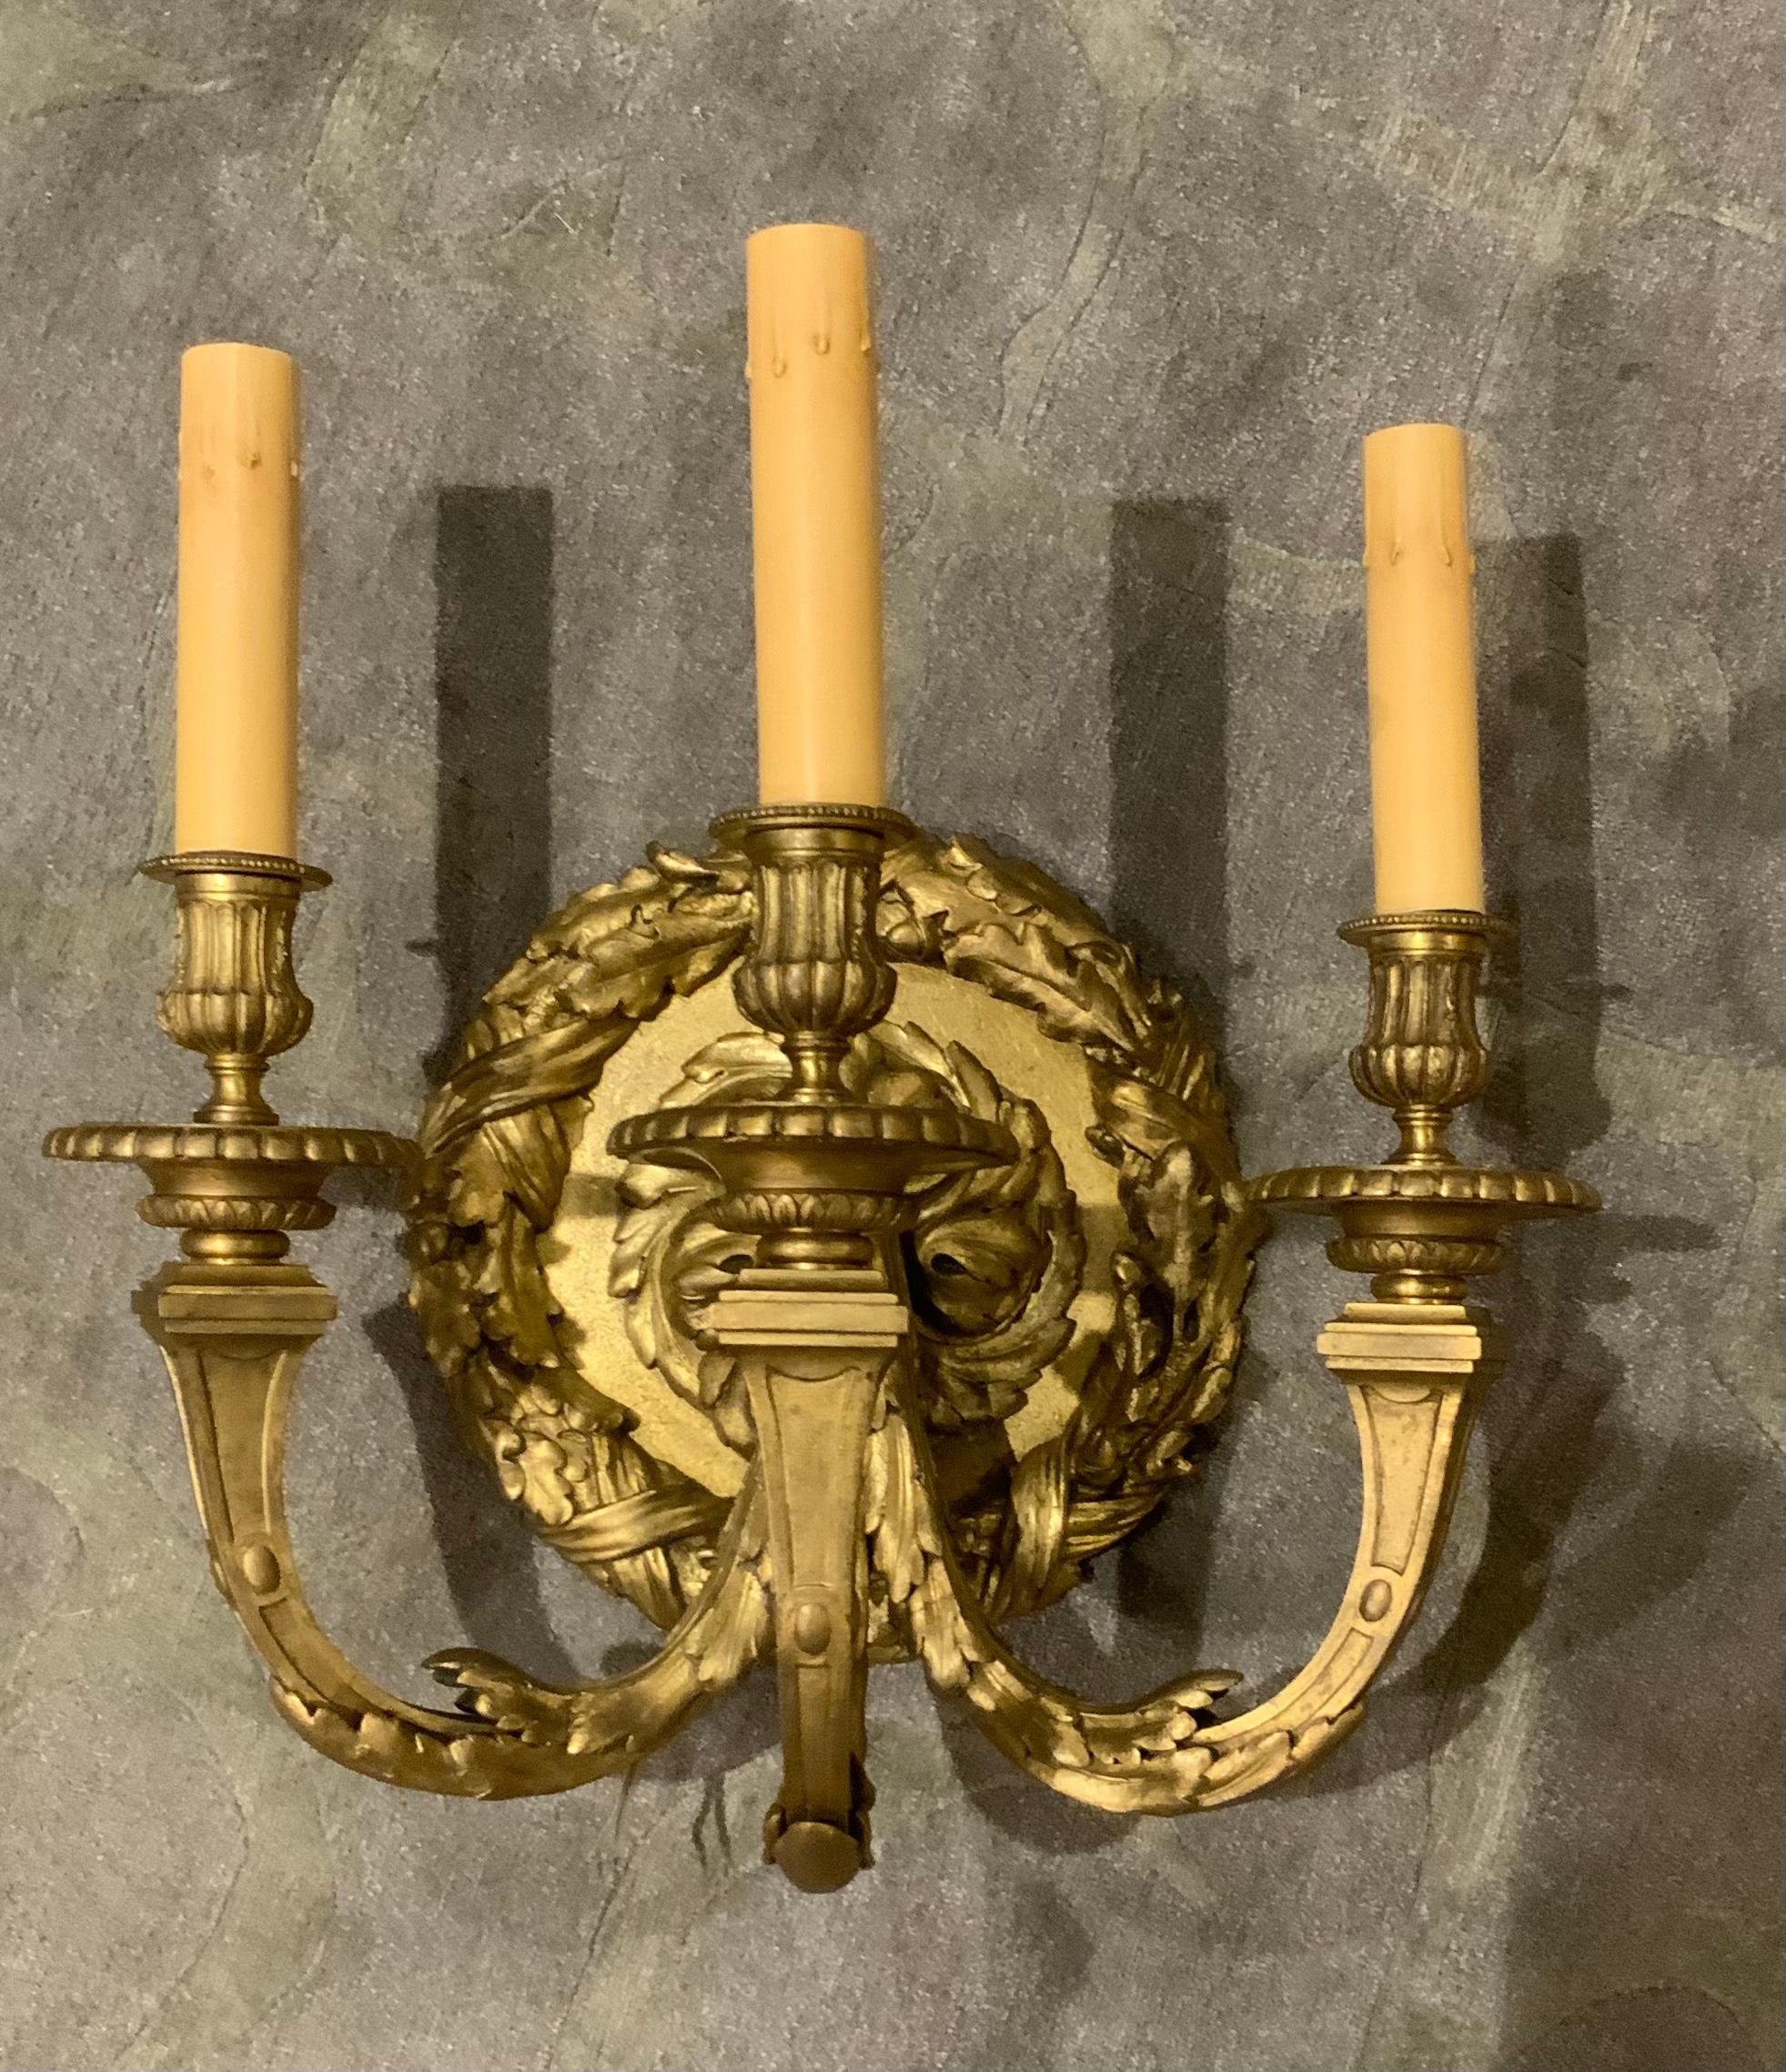 Large and distinguished bronze dore sconce with a central
Decorative swirling feature which the three large arms
Eminate. The arms curve upward to hold three lights.
The sconce is wired and ready for installation. The central 
Design is